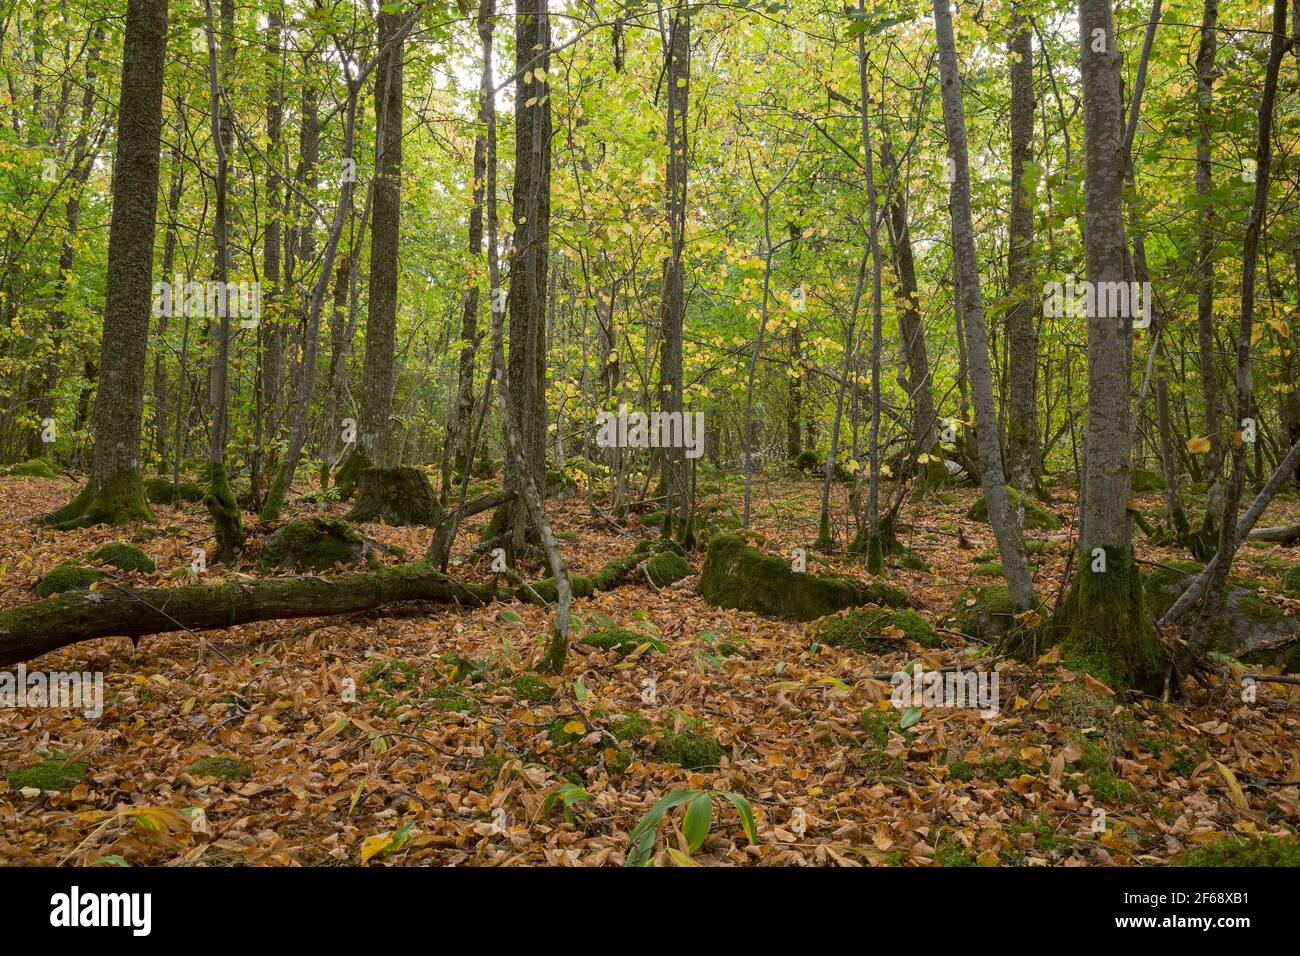 Autumn in a natural deciduous forest in sweden Stock Photo